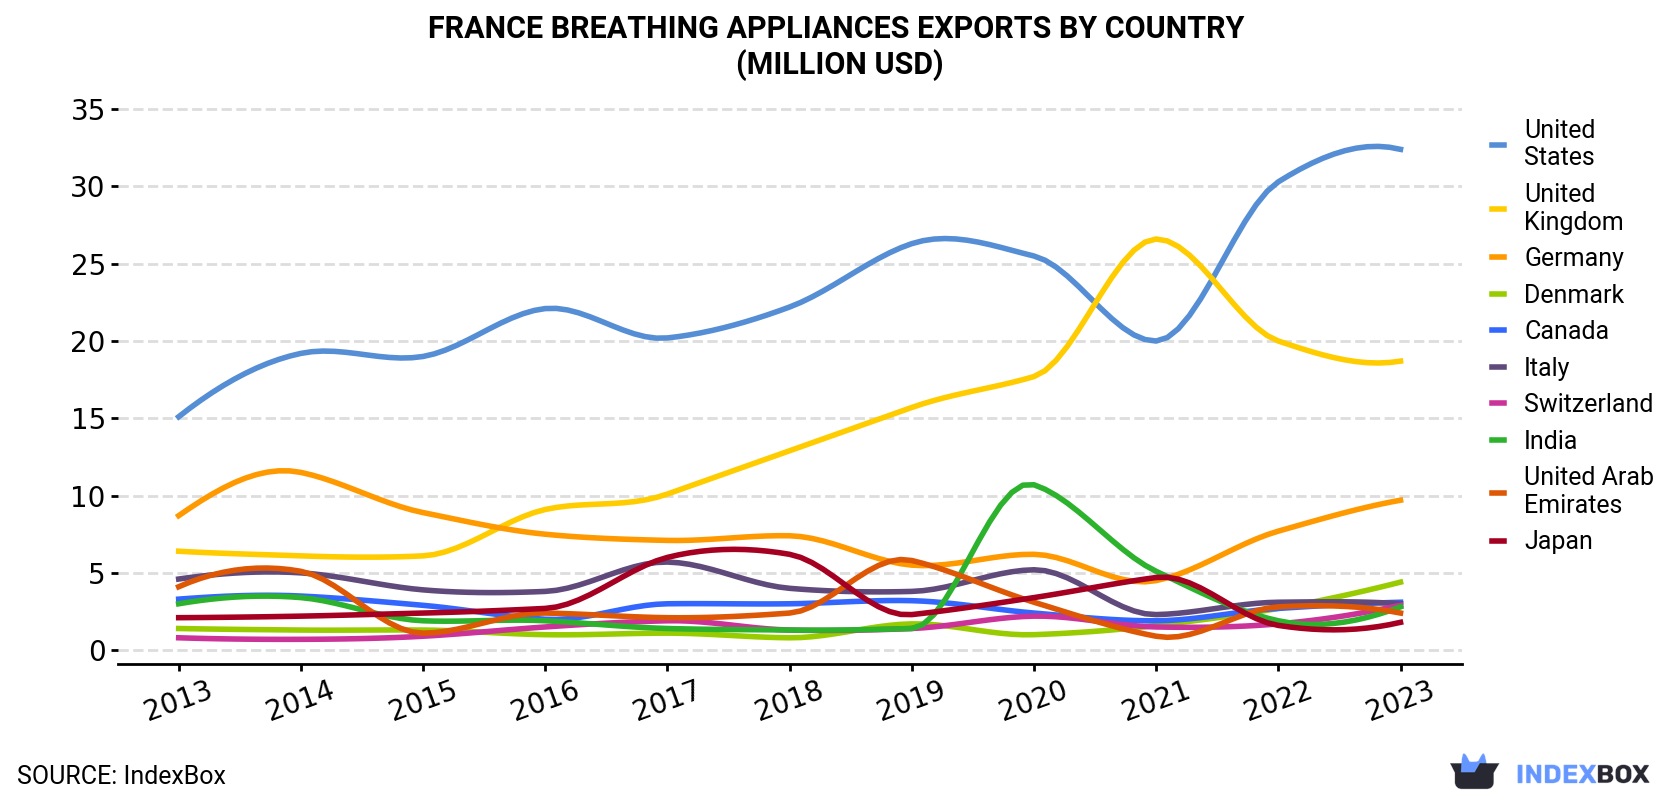 France Breathing Appliances Exports By Country (Million USD)